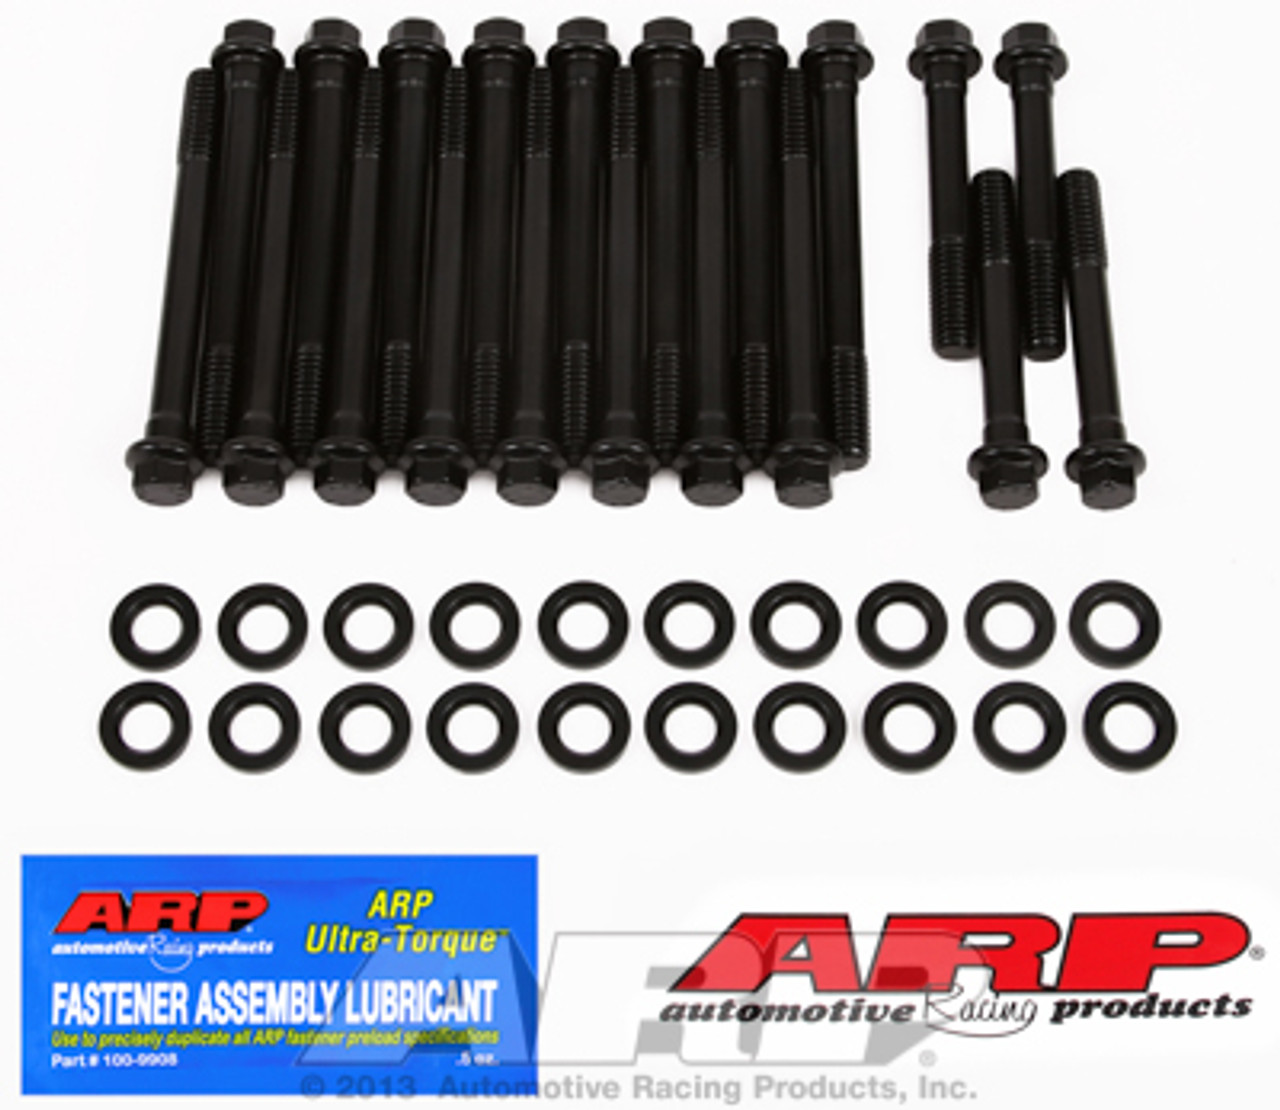 ARP 180-3600 Cylinder Head Bolts - Oldsmobile V8 1965-1976 w/ 7/16" Head Bolts